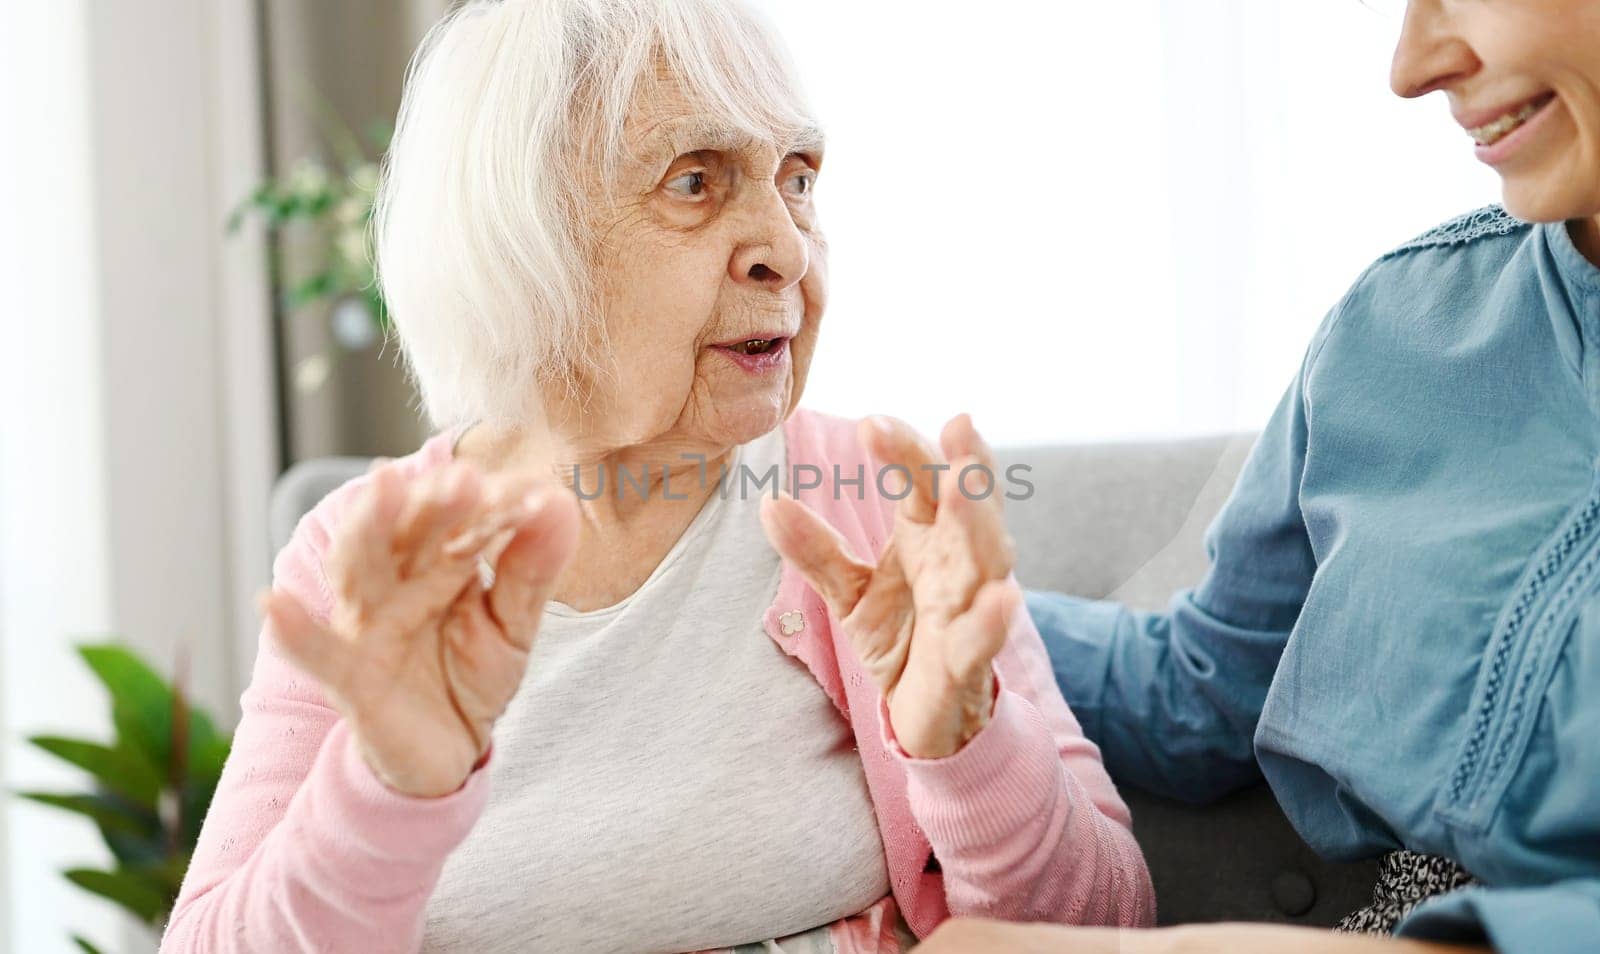 Old Grandma Chats With Granddaughter On Hallway Couch by GekaSkr